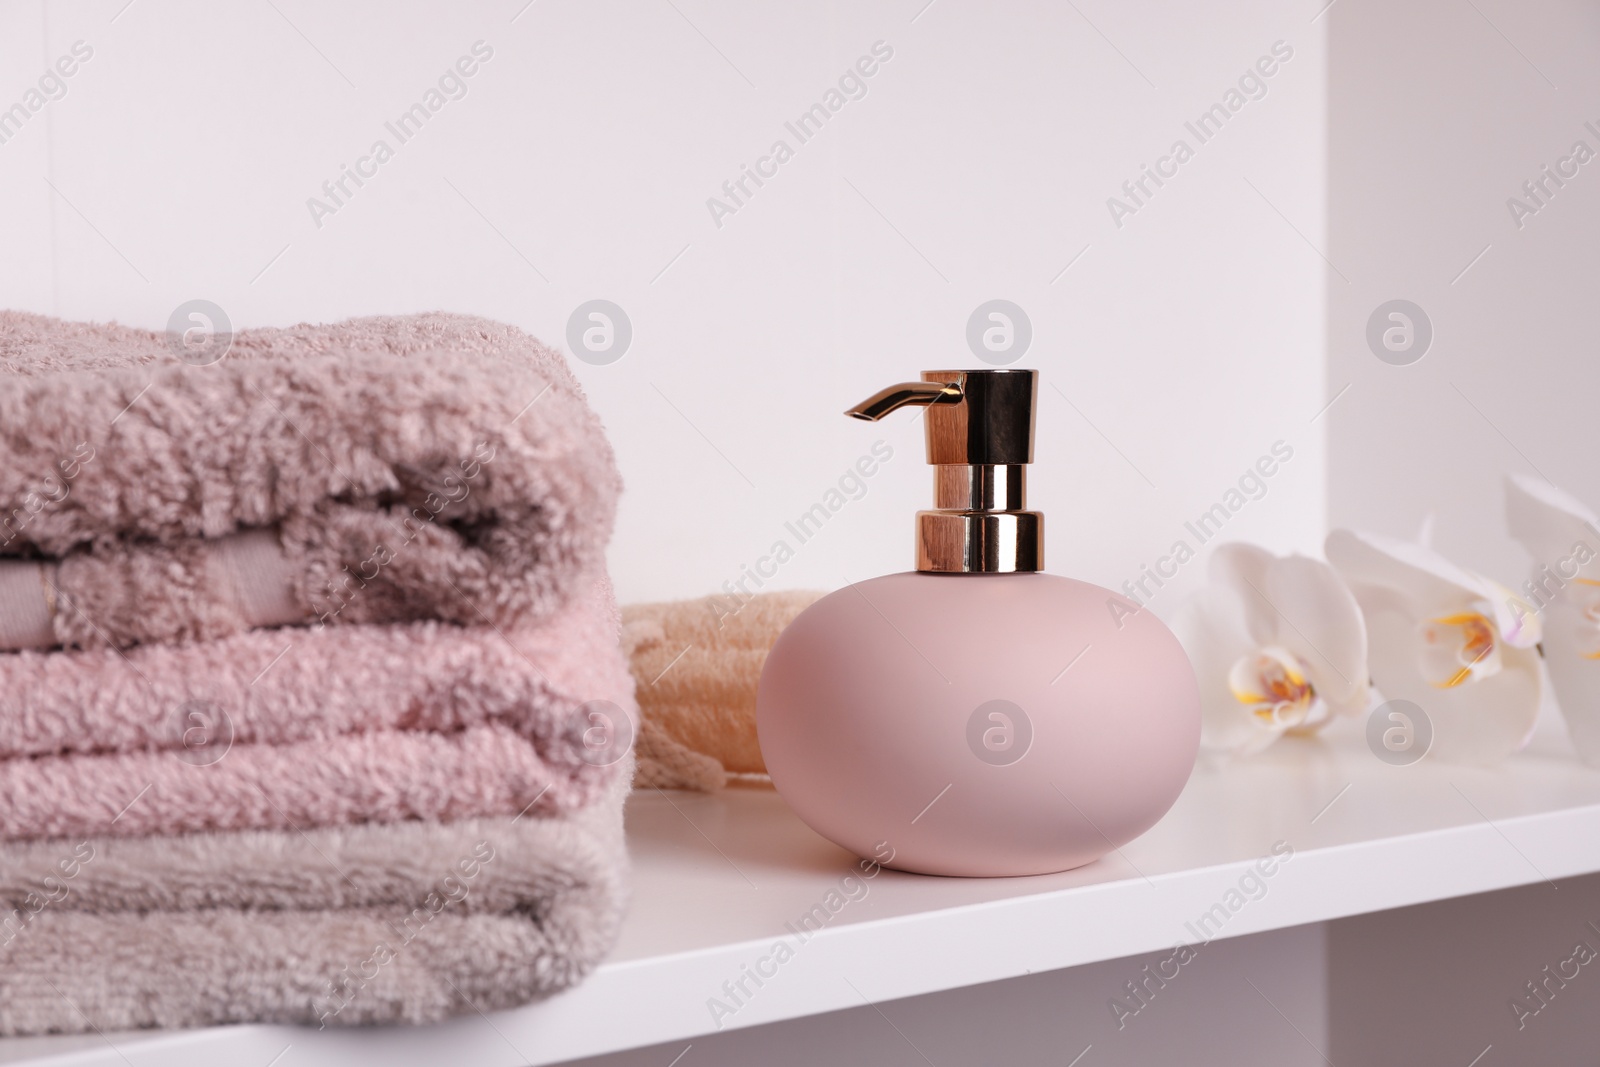 Photo of Stylish soap dispenser with towels and flowers on shelf